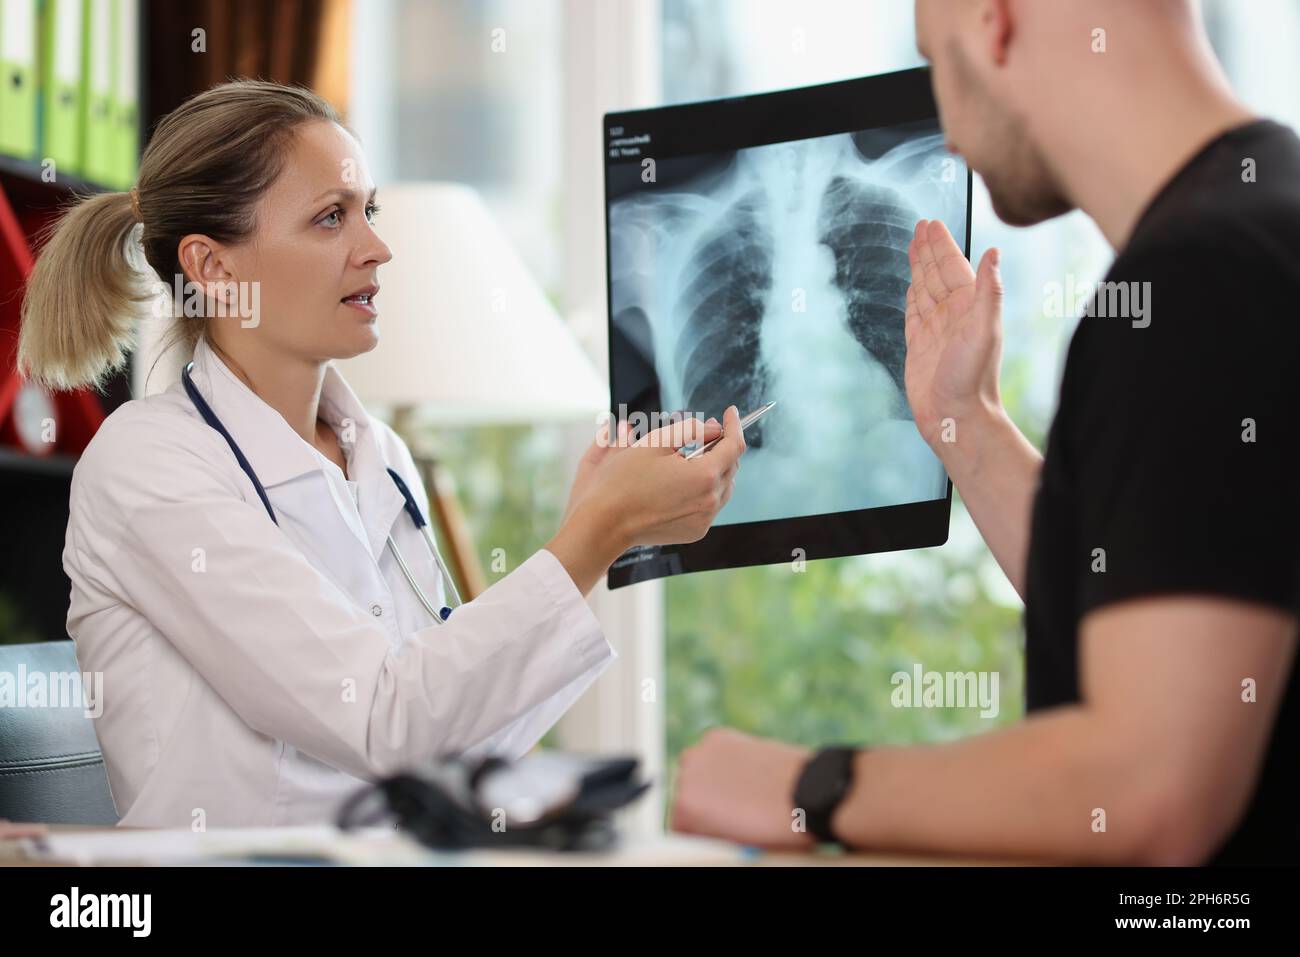 Family doctor shows x-ray picture to patient at appointment Stock Photo